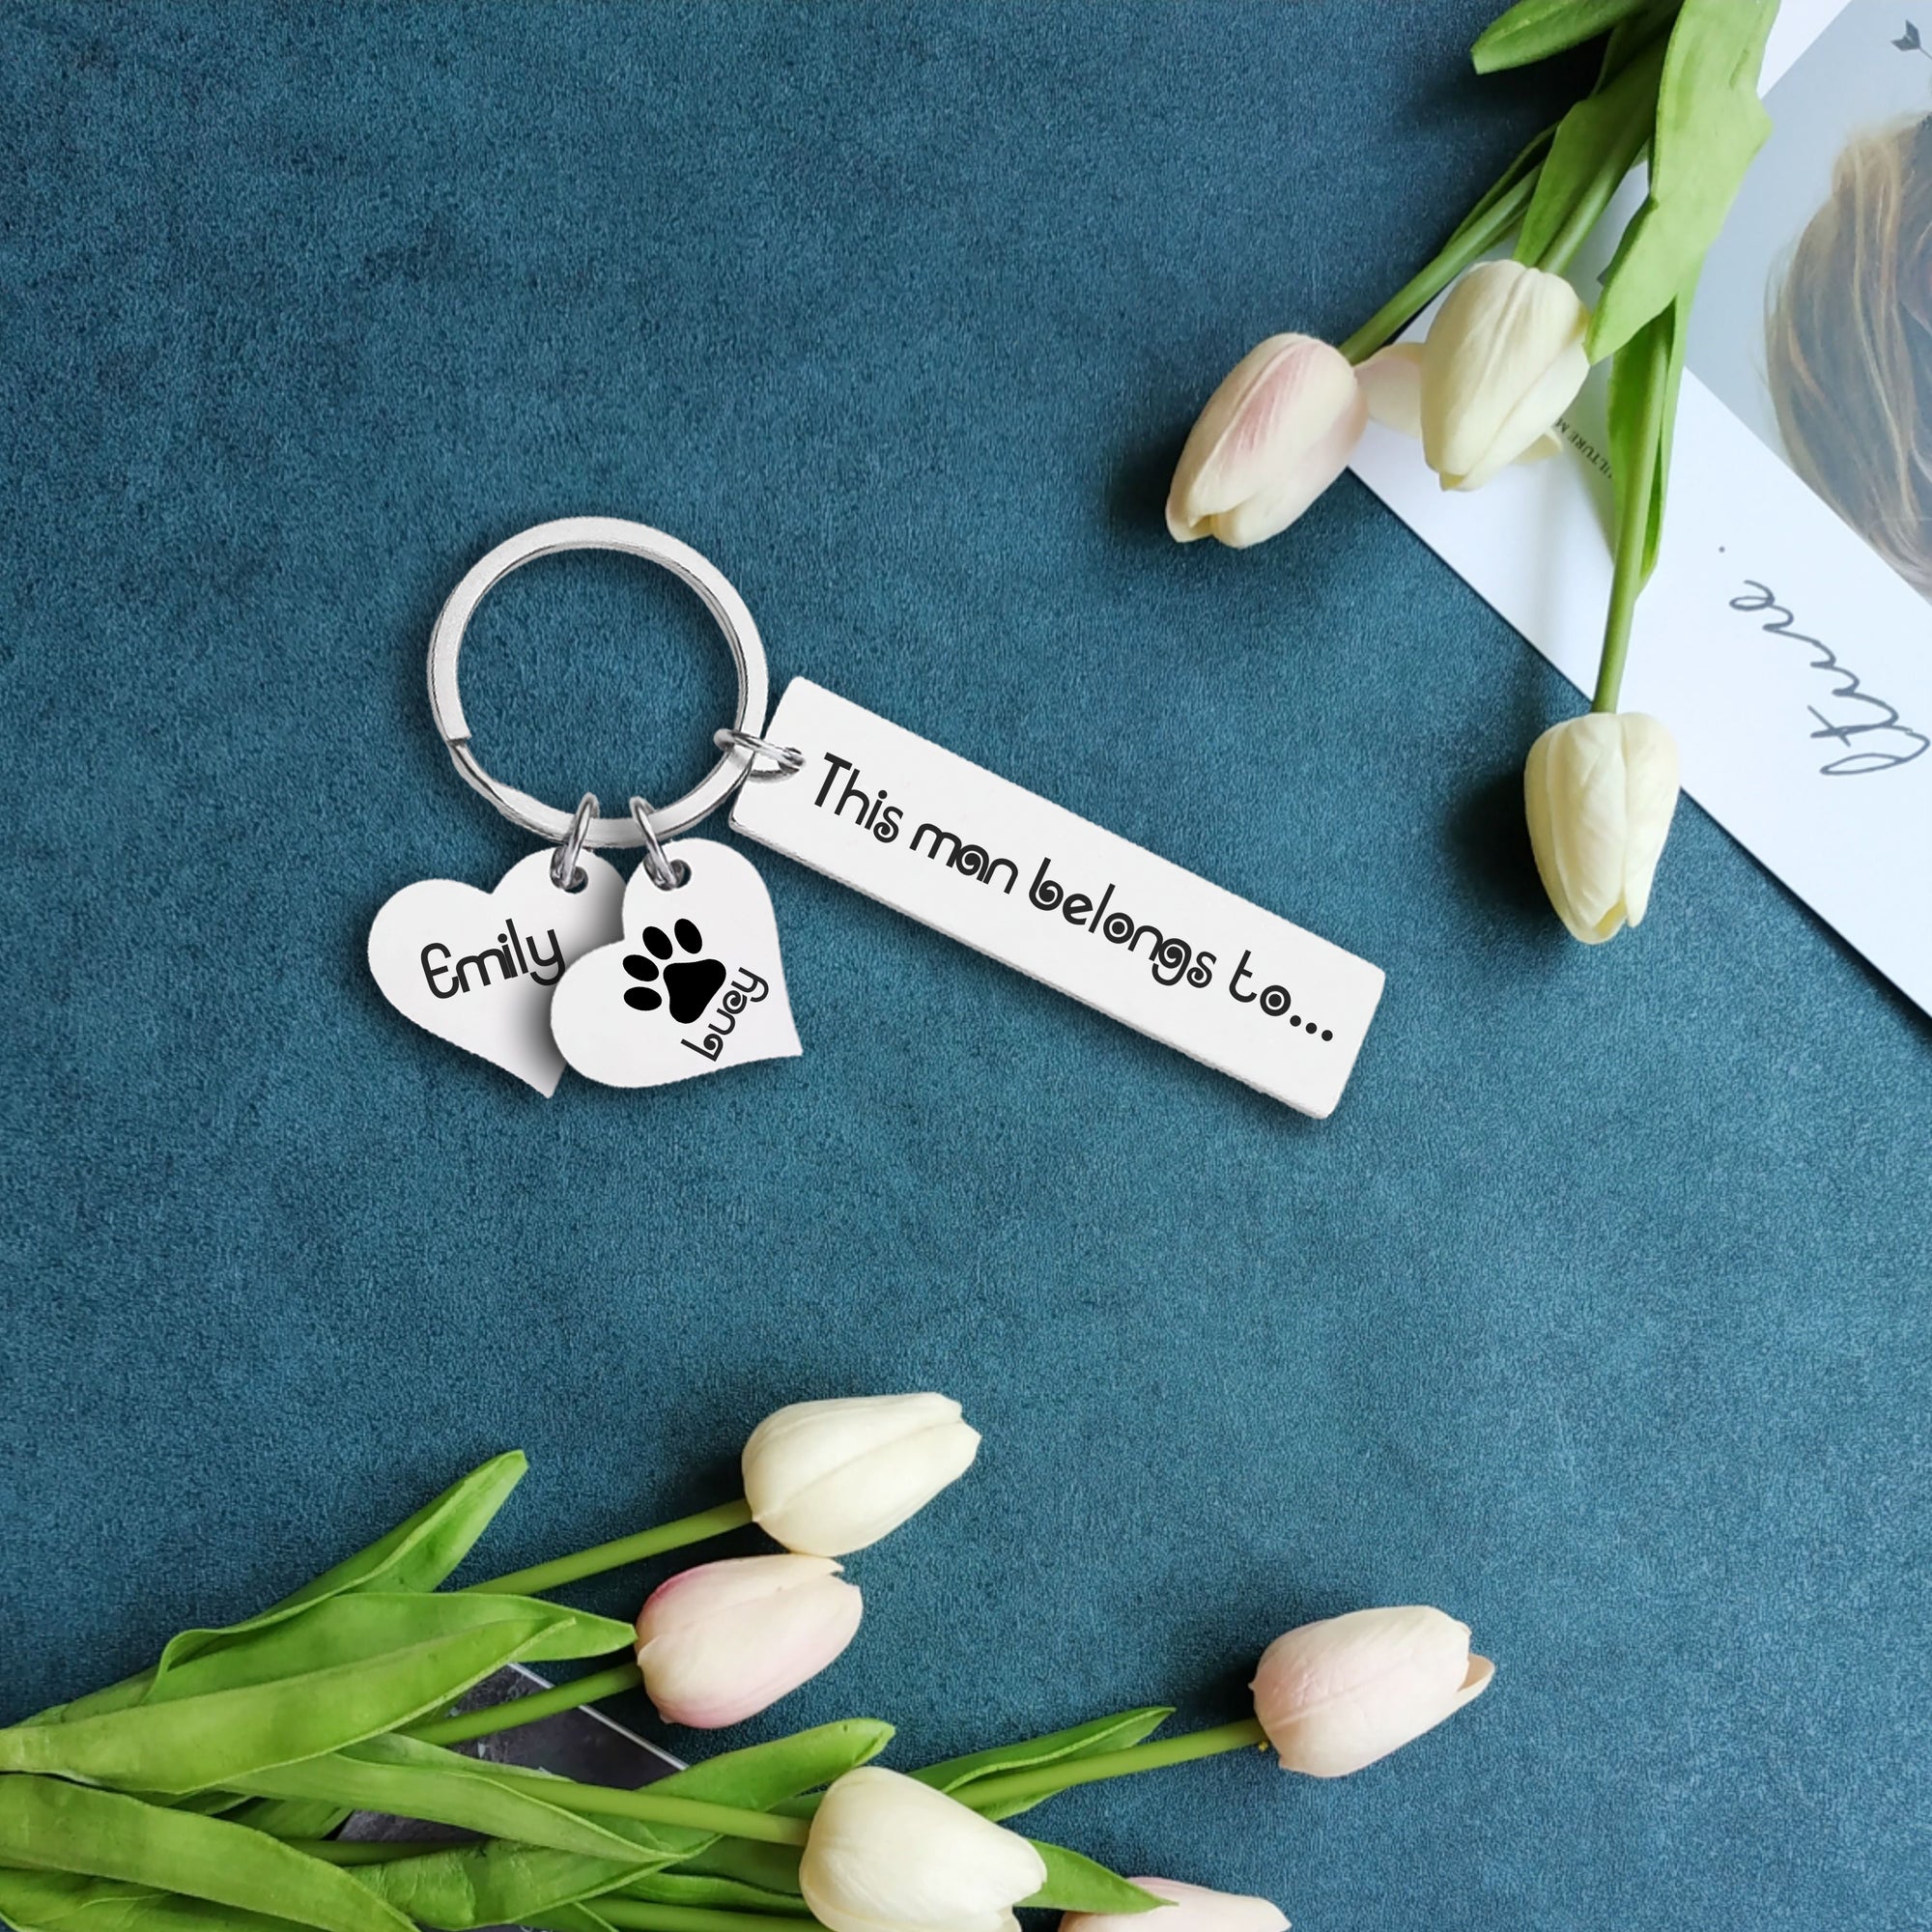 Personalised Paw Prints Keychain - Dachshund - To My Man - You Are My Life - Ukgkc26010